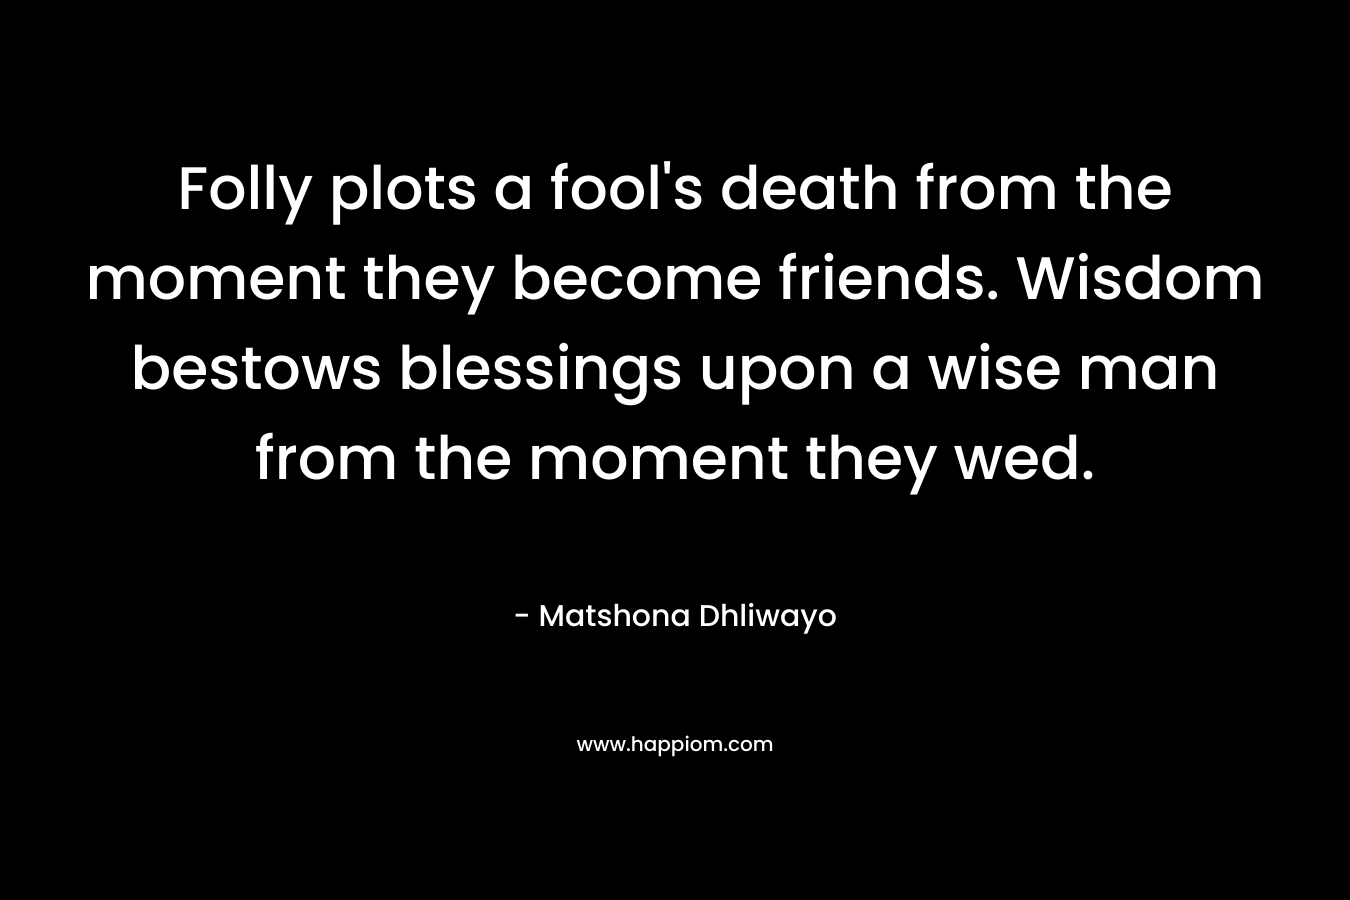 Folly plots a fool's death from the moment they become friends. Wisdom bestows blessings upon a wise man from the moment they wed.